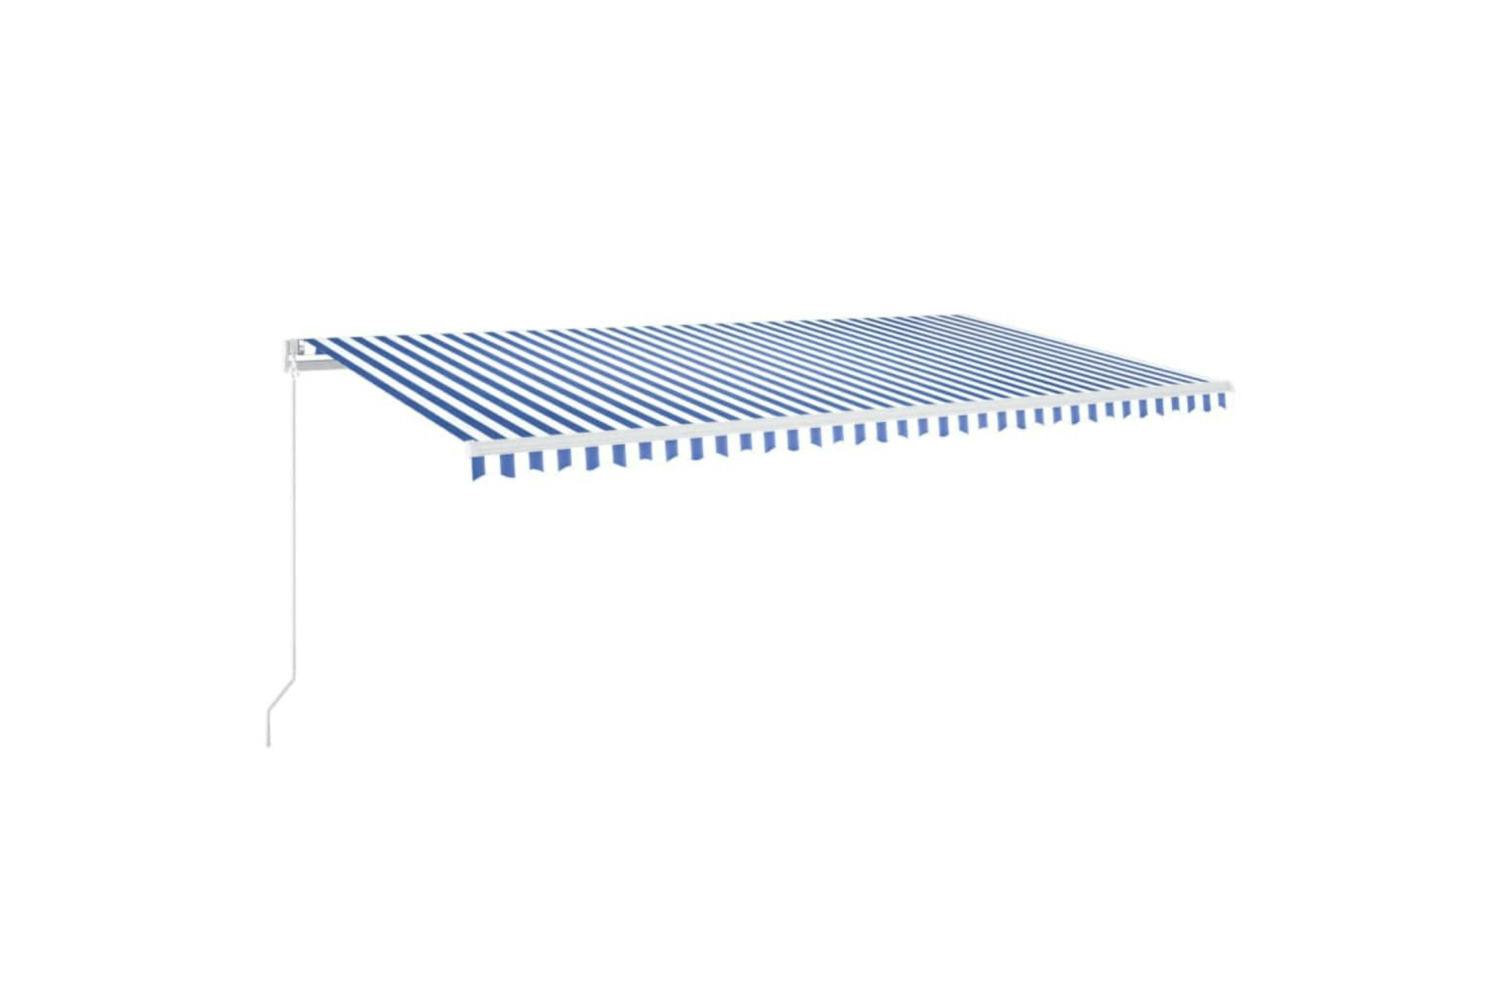 Vidaxl 3069041 Manual Retractable Awning With Led 600x350 Cm Blue And White